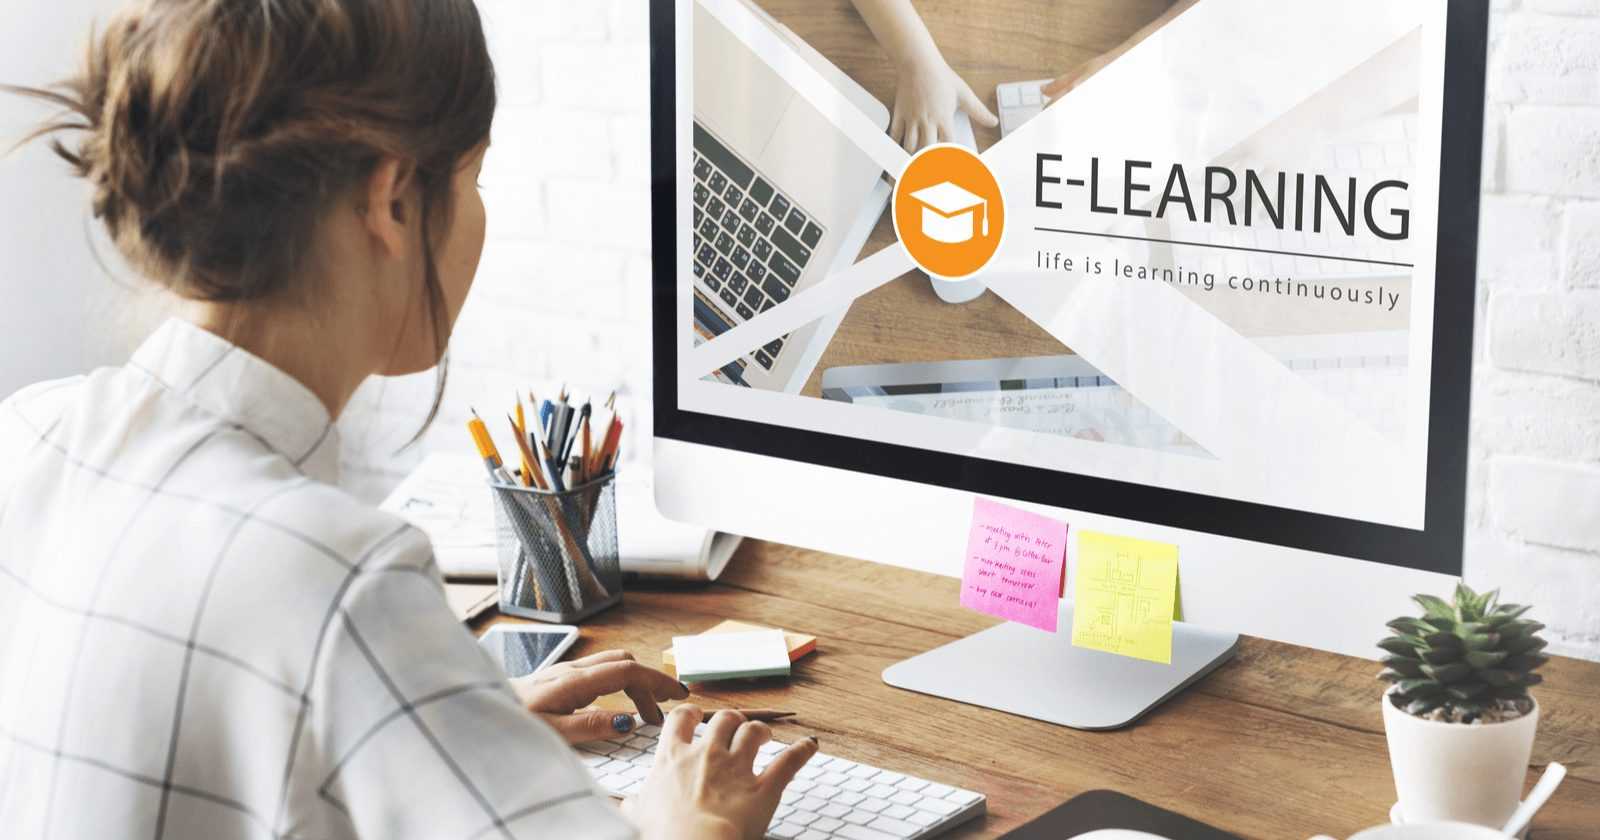 Growth Strategies for eLearning Business - Visartech Blog